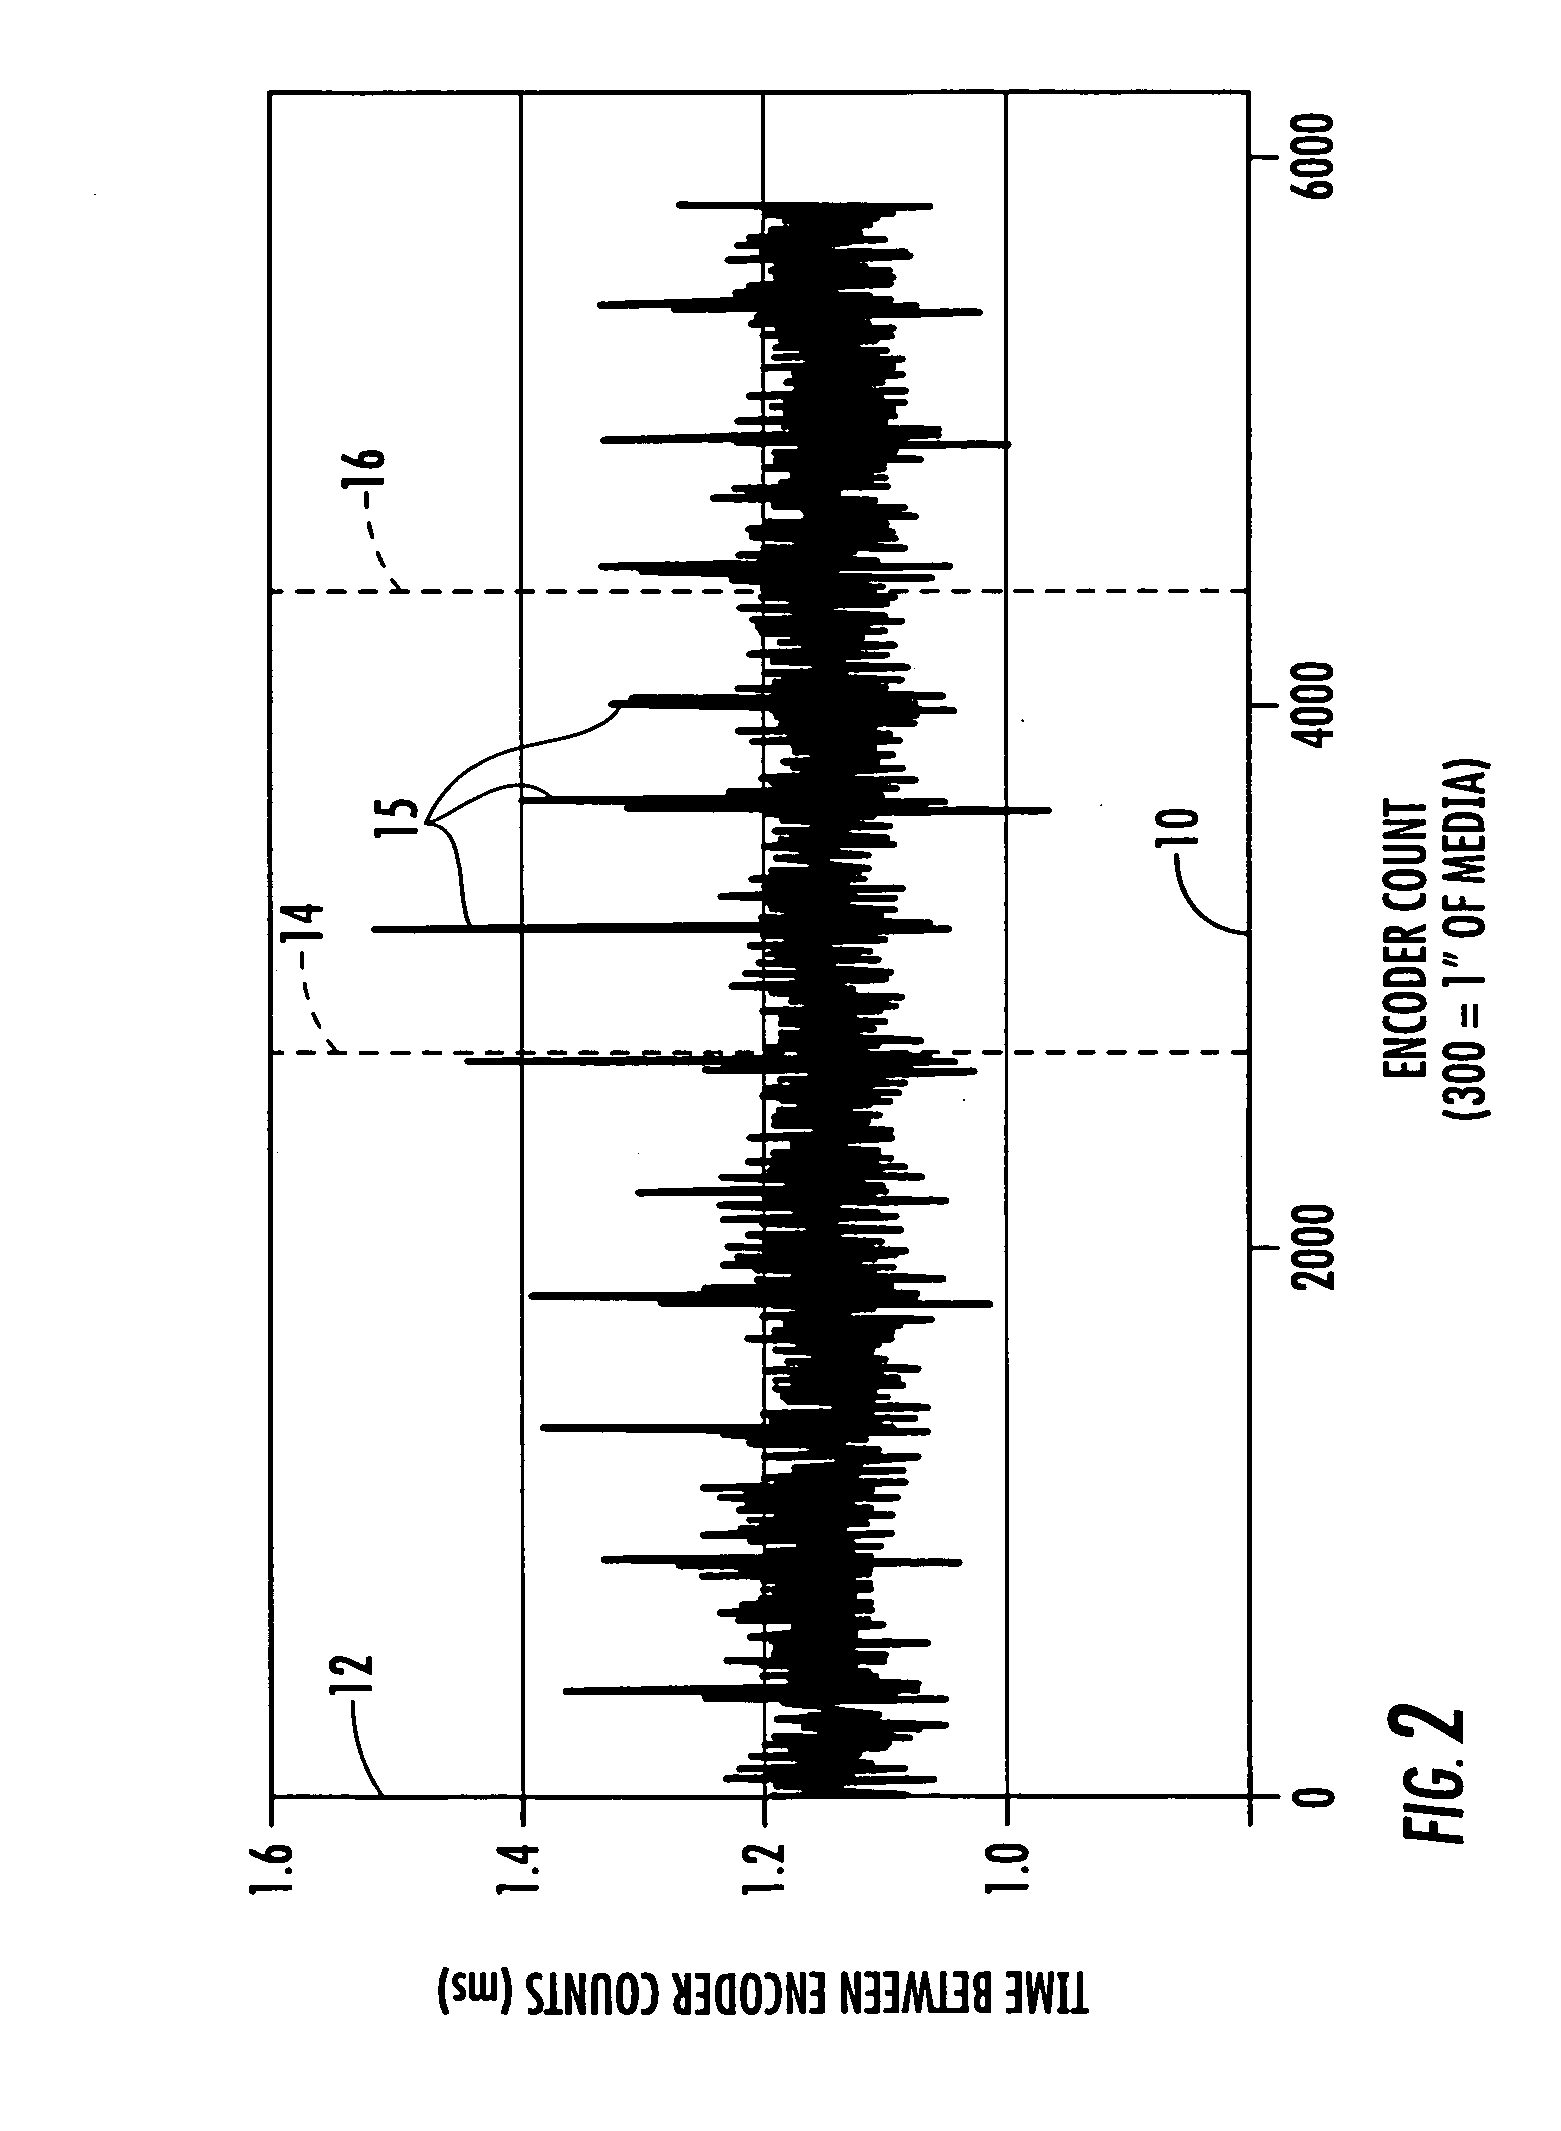 Method of adjusting strobe length in a thermal printer to reduce effects of changes in media transport speed